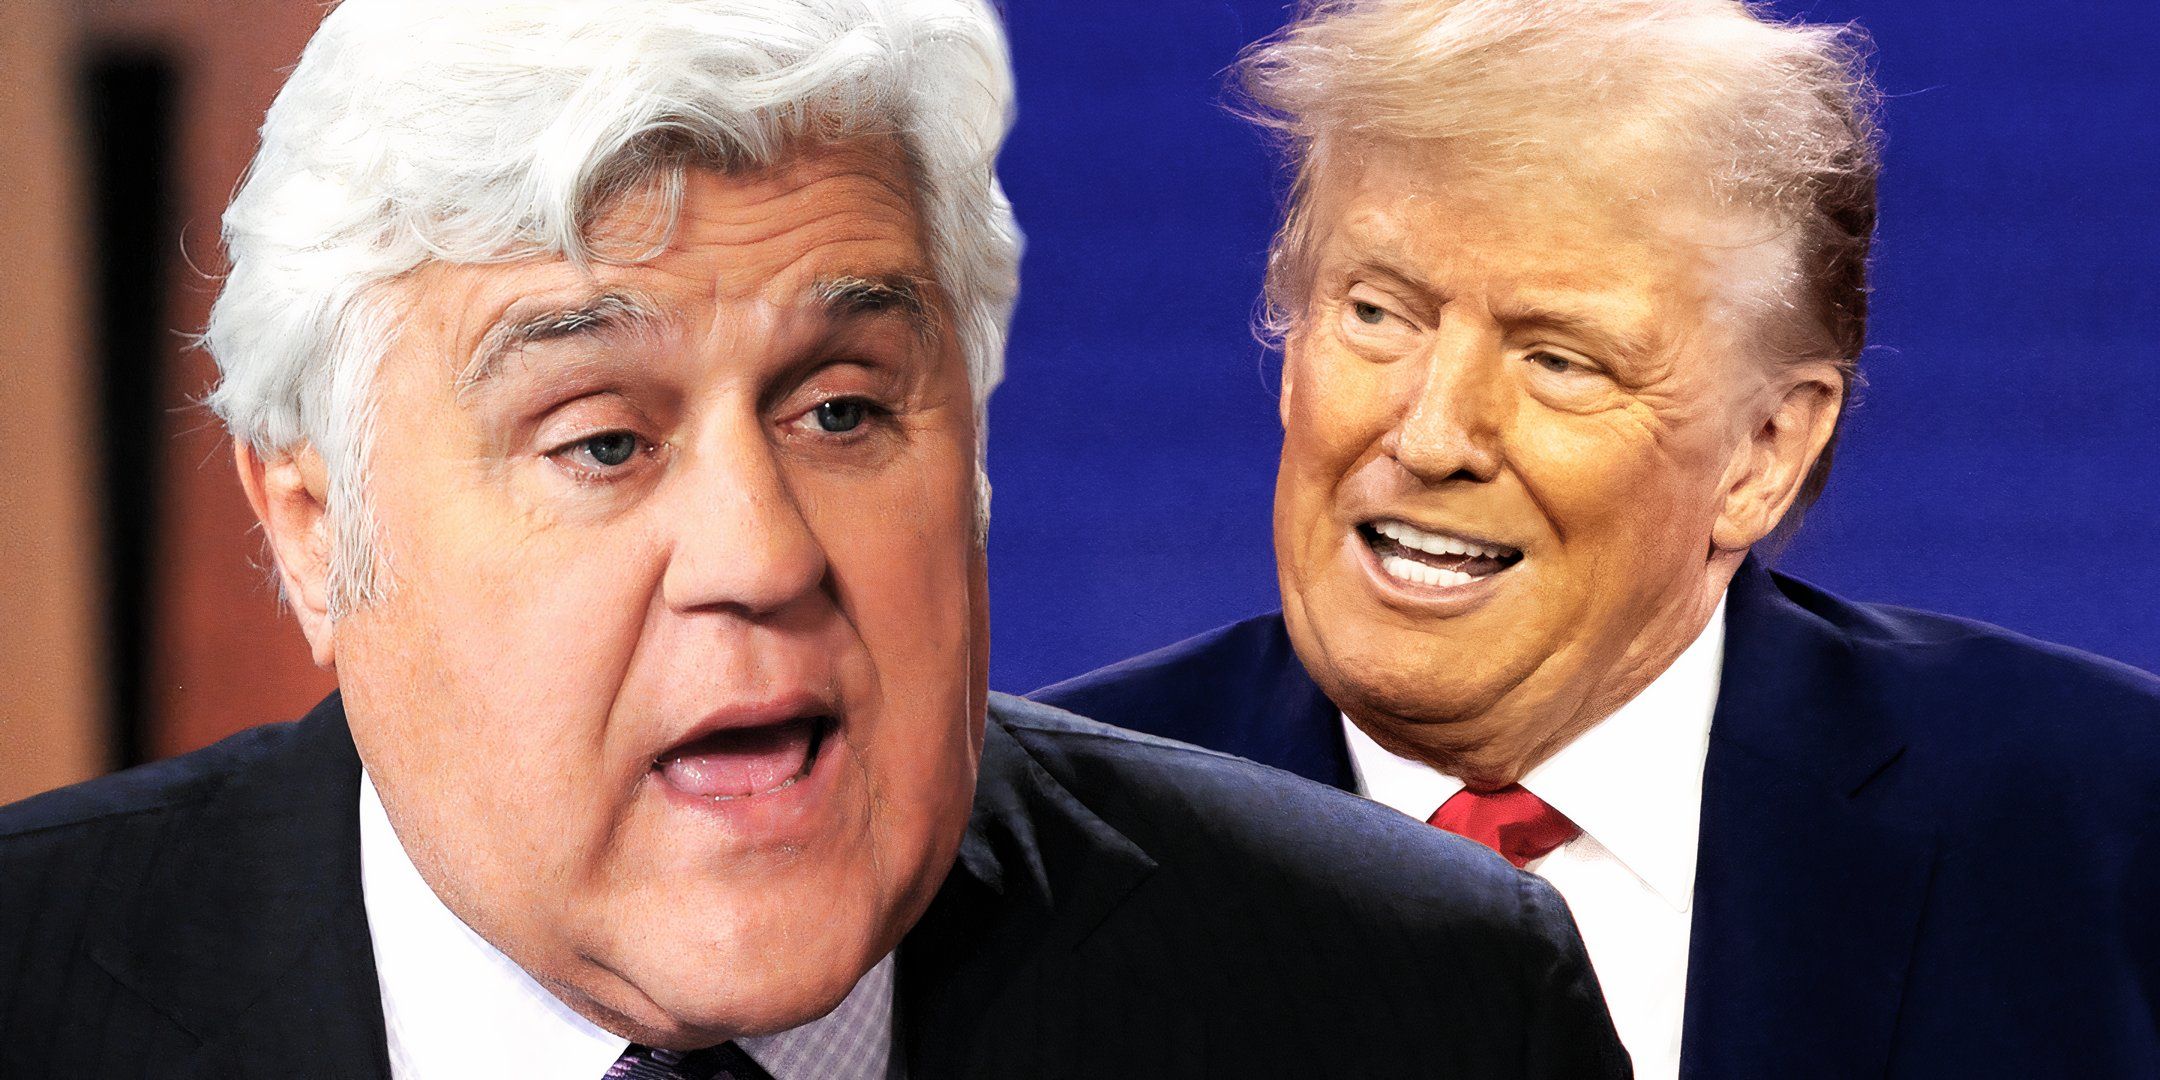 Jay Leno interview with Donald Trump